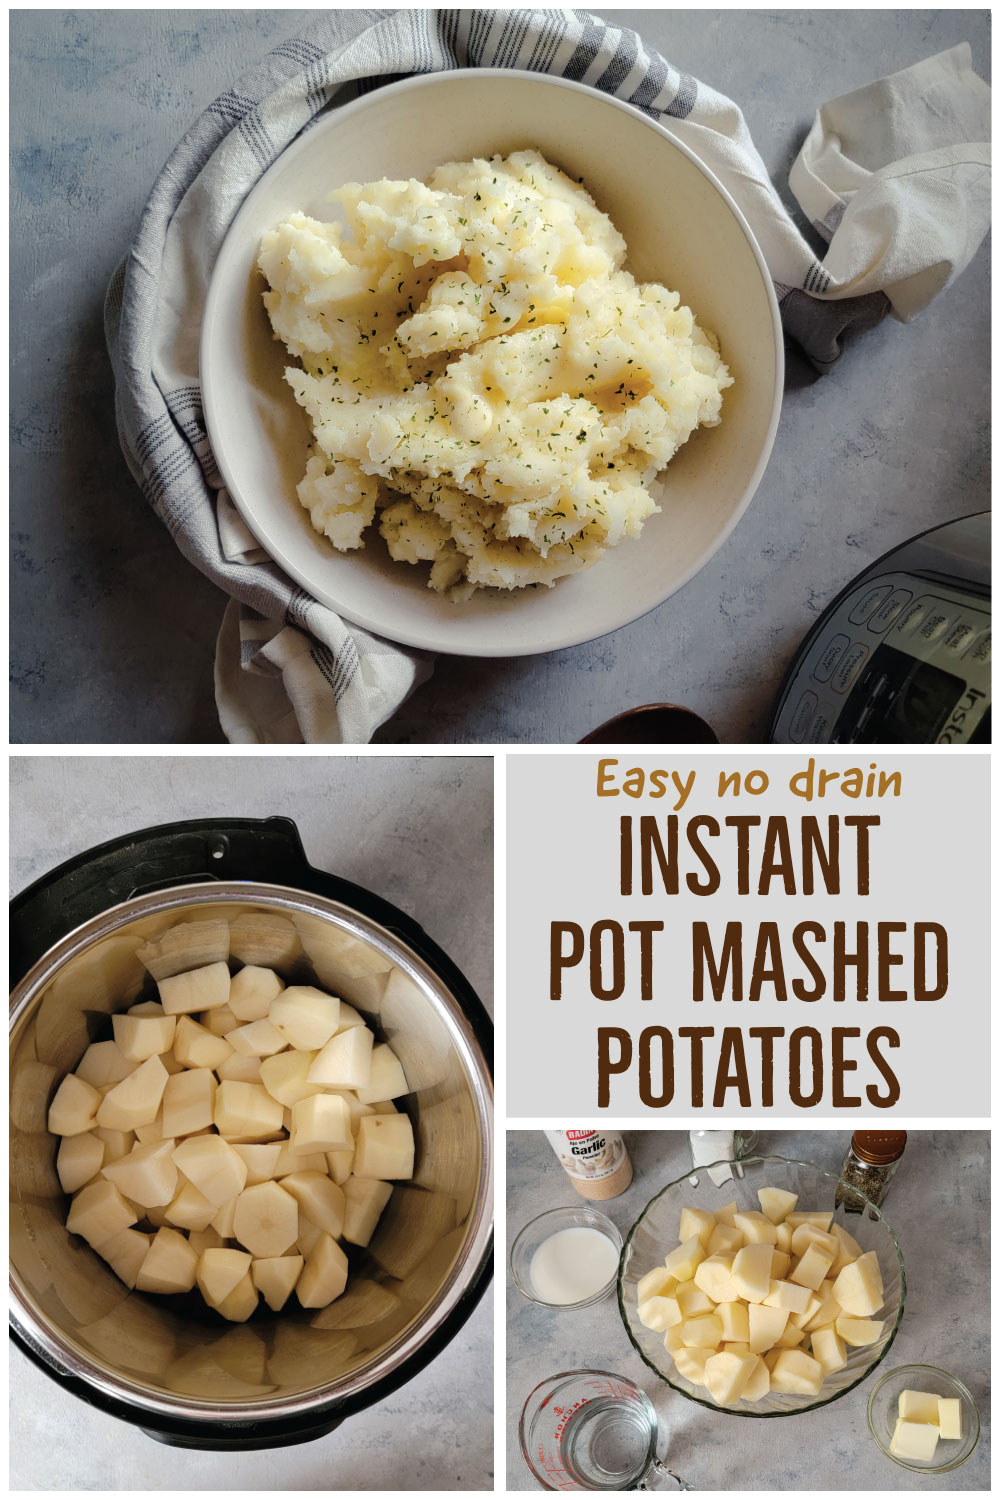 Easy no drain Instant Pot mashed potatoes Pinterest graphic. 3 images. 1 is the ingredients - potatoes. milk, water, butter, garlic, salt and pepper. 1 is potato chunks in the Instant Pot ready to cook. 1 is mashed potatoes in a serving bowl topped with melted butter and parsley.